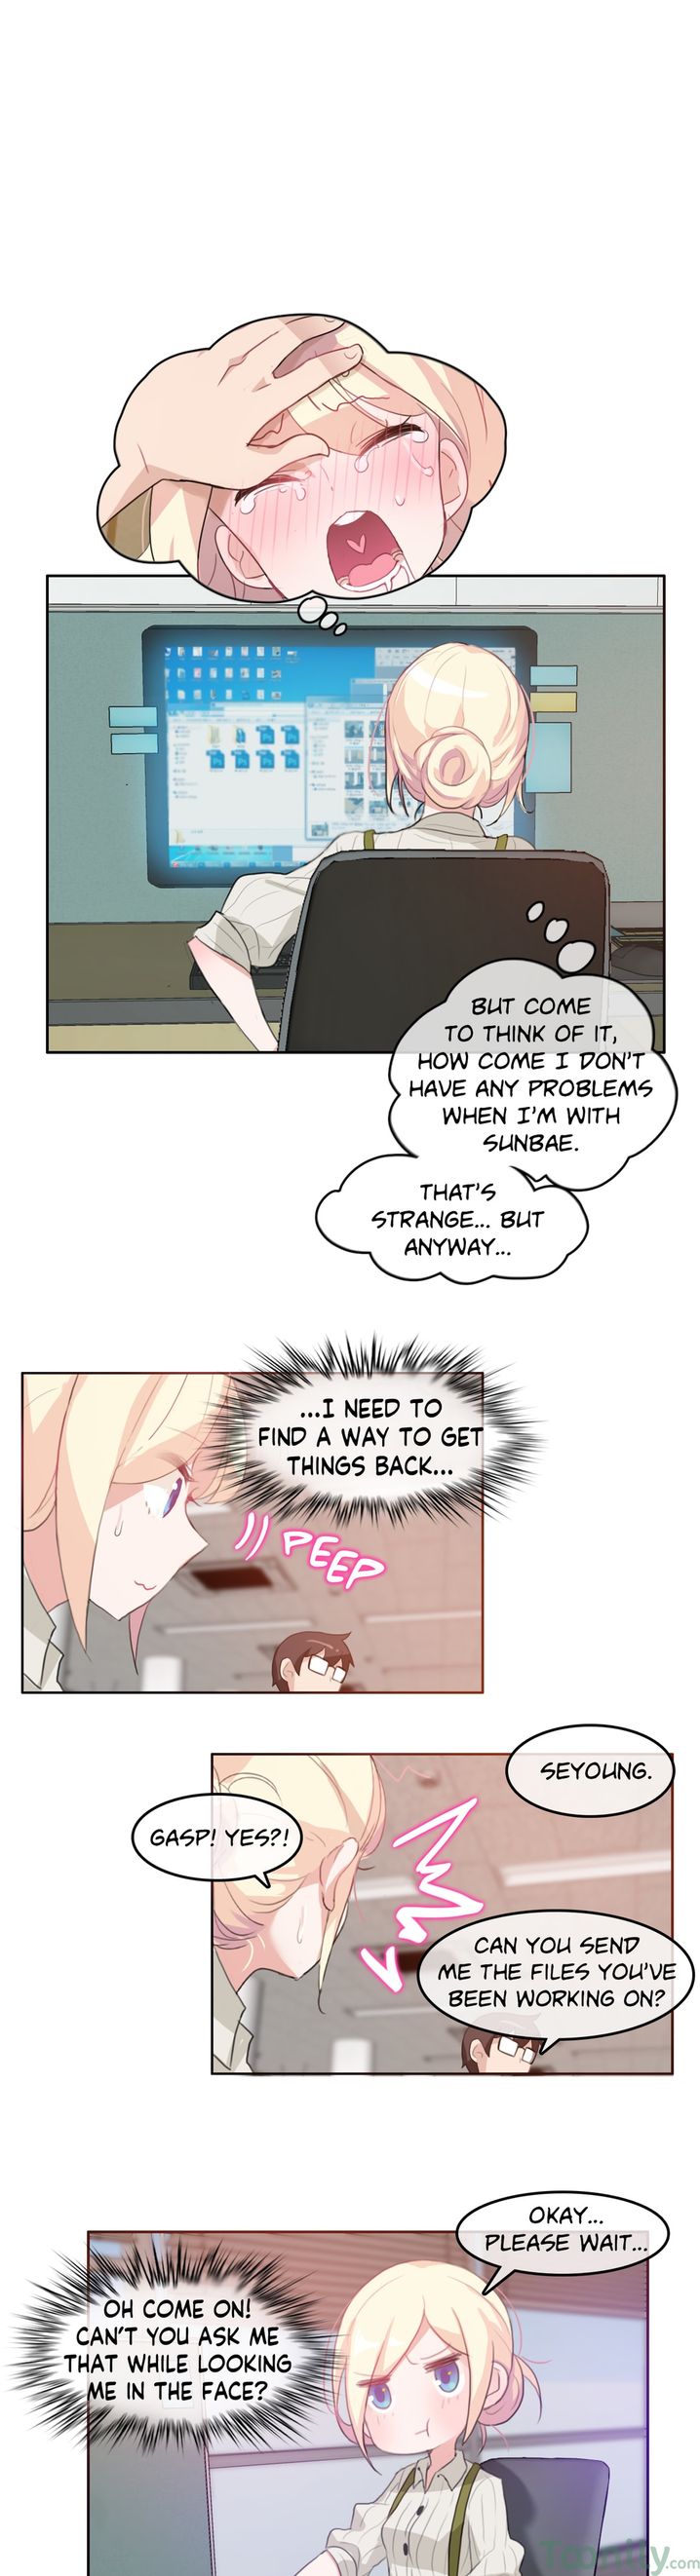 A Pervert’s Daily Life - Chapter 8 Page 9